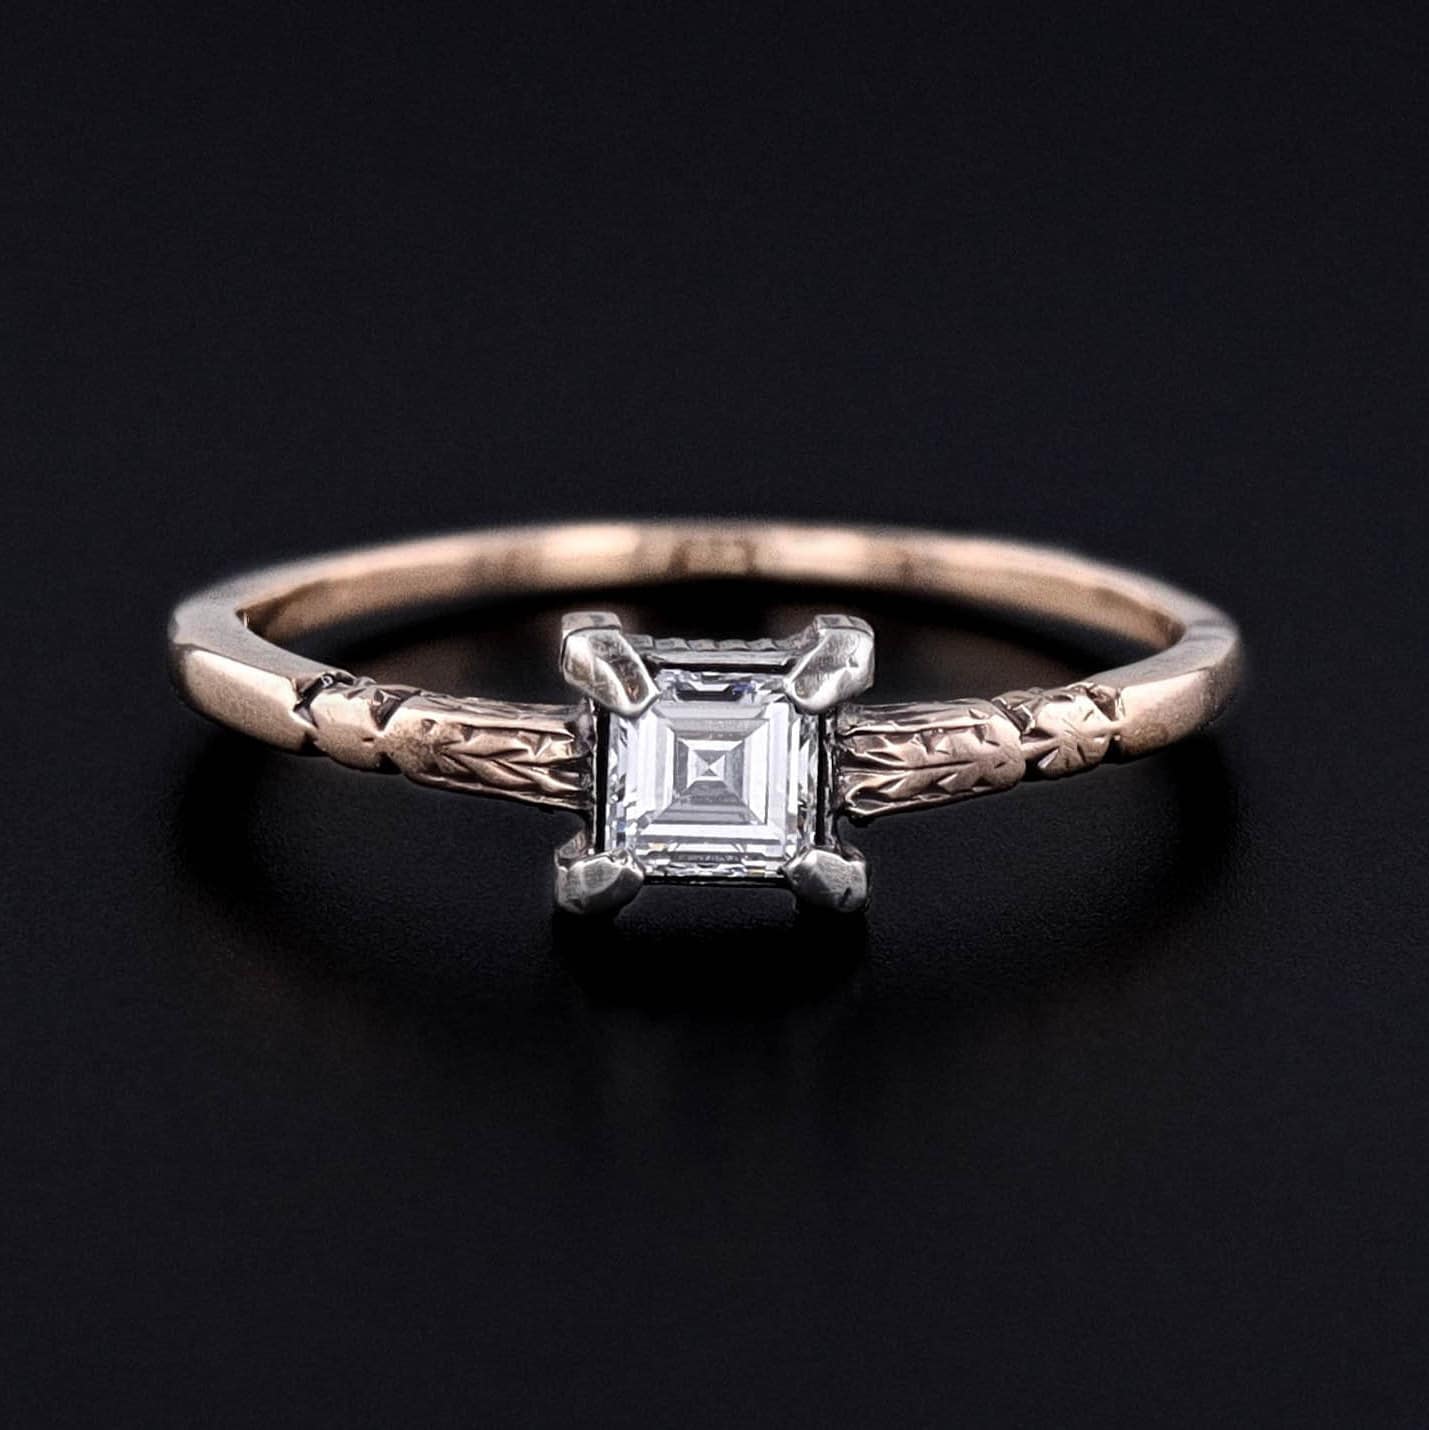 Step into the elegance of the late 19th century with this 1890s ring showcasing an emerald-cut, 0.26 ct diamond set in luxurious 12ct gold. The ring is a size 6, but can be resized free of charge.